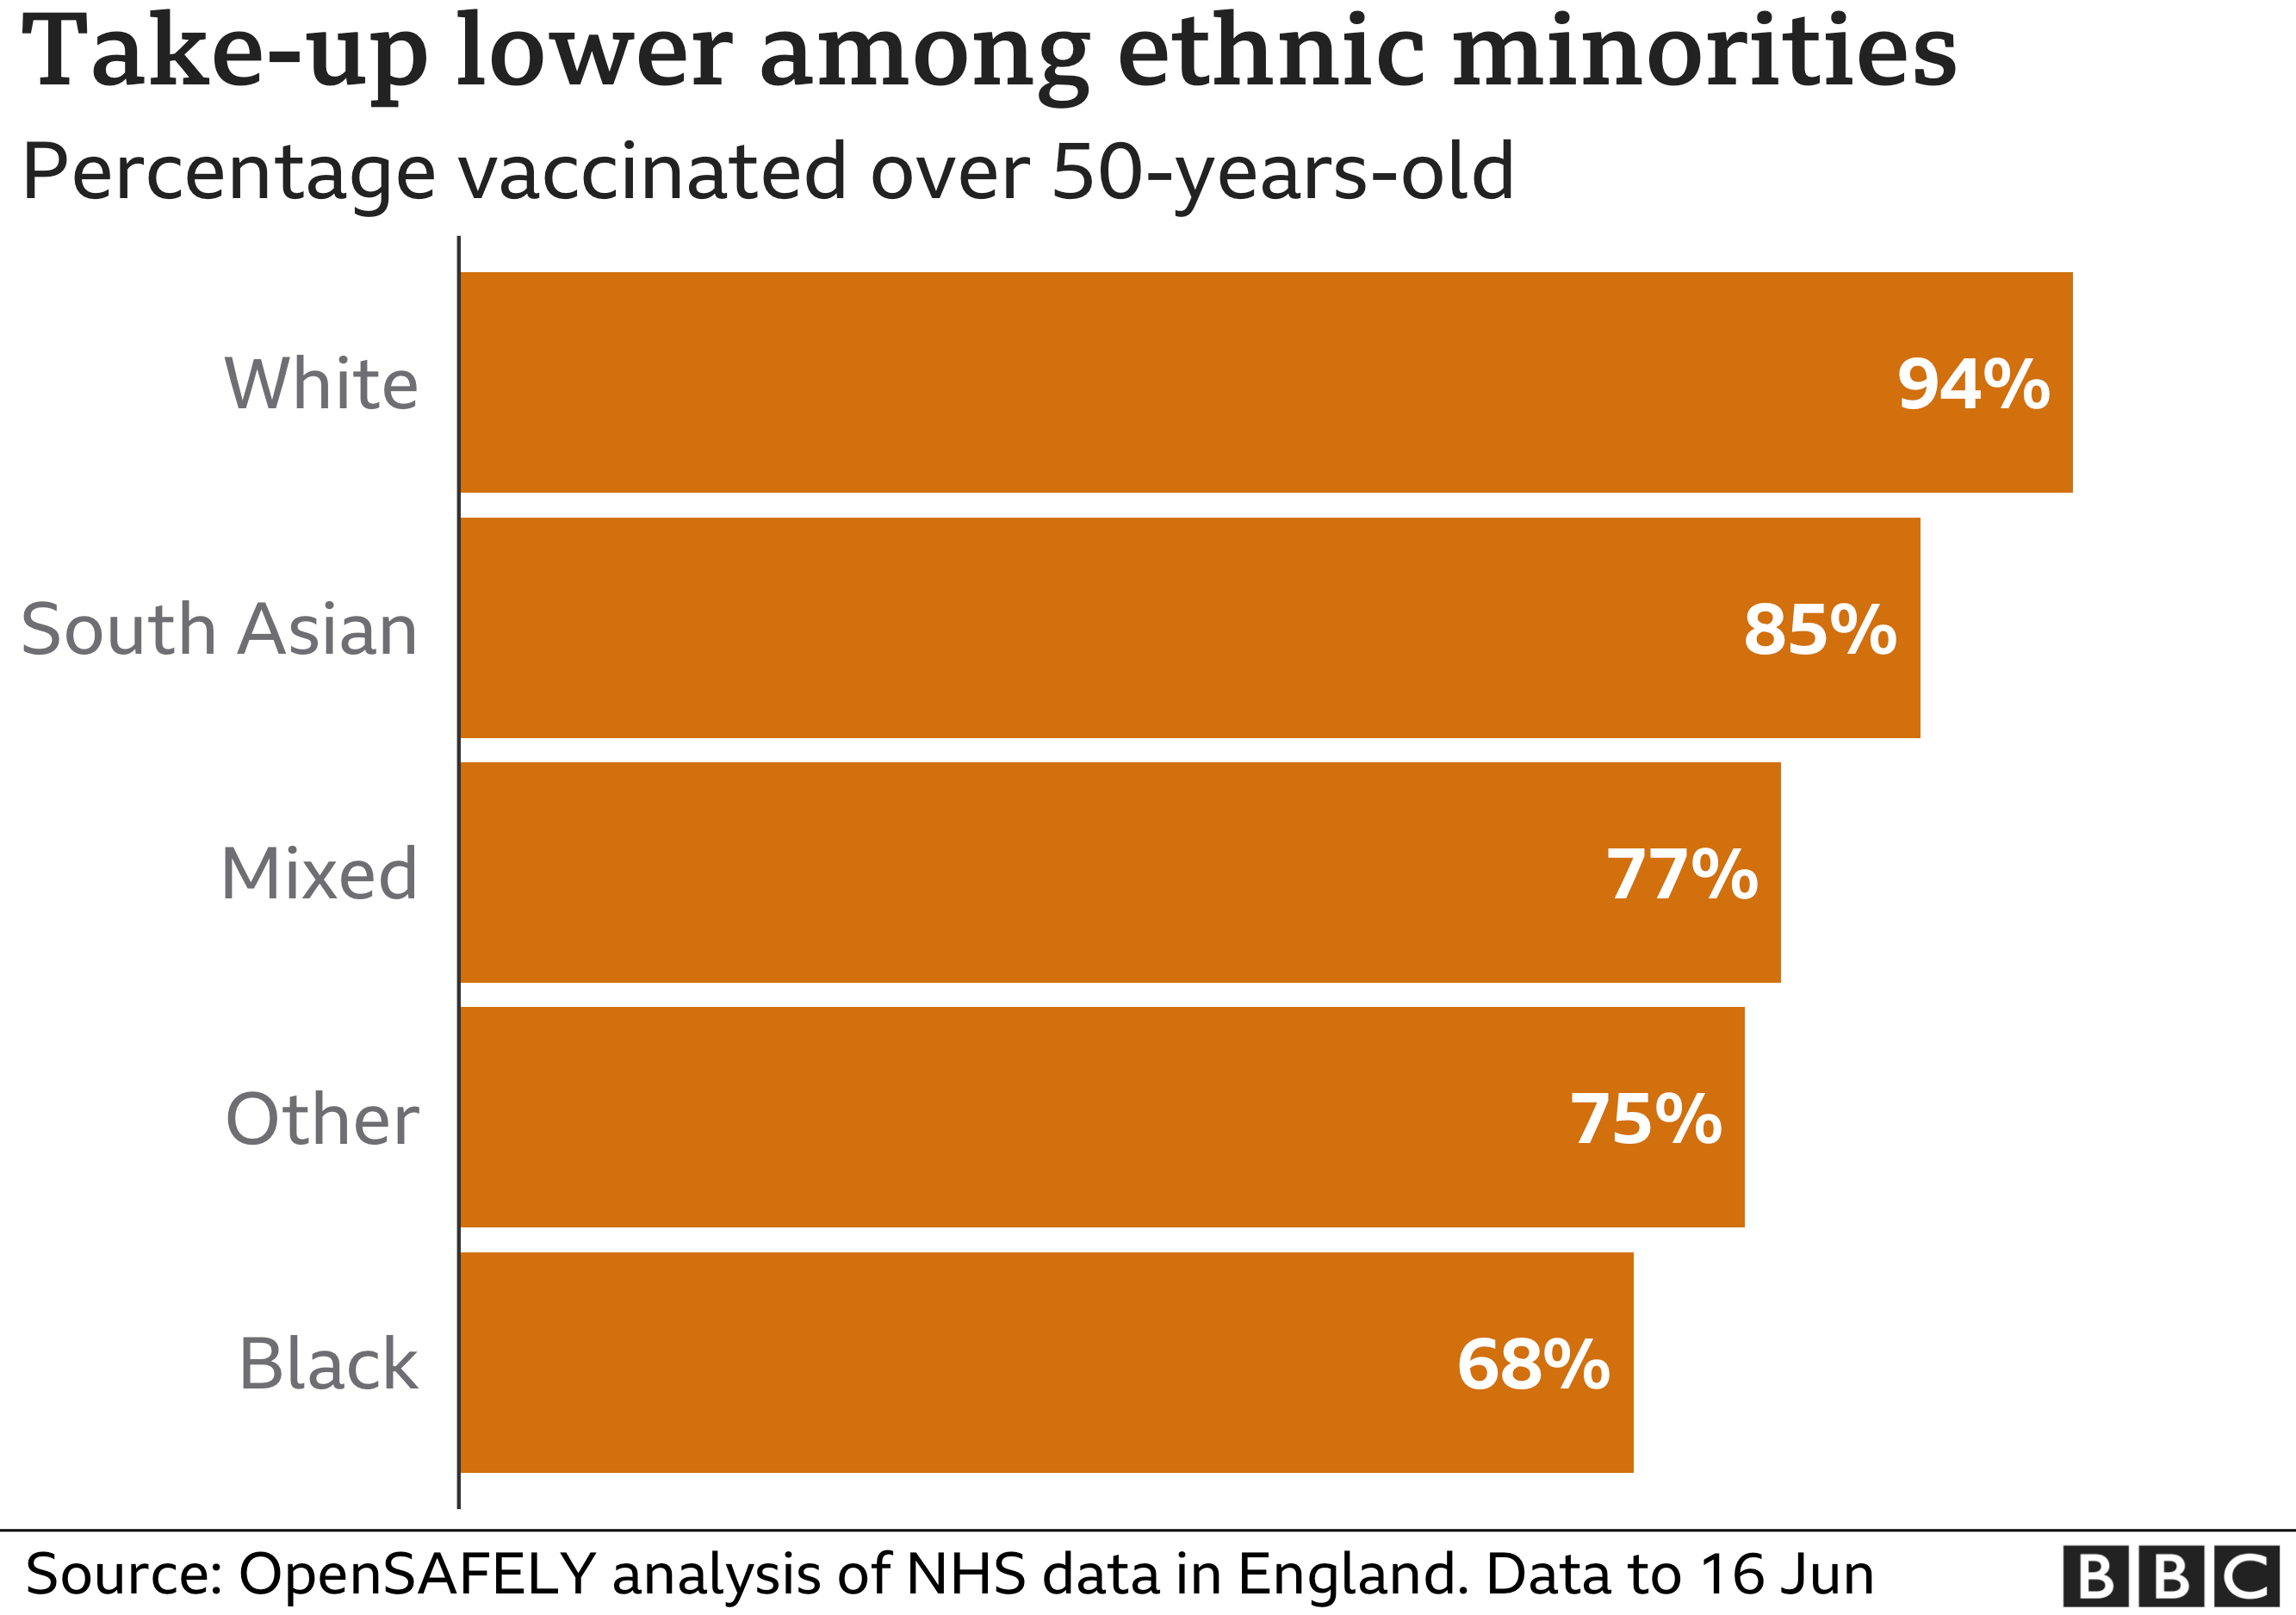 Chart showing take-up of the vaccine is lower among ethnic minorities. Updated 24 June.